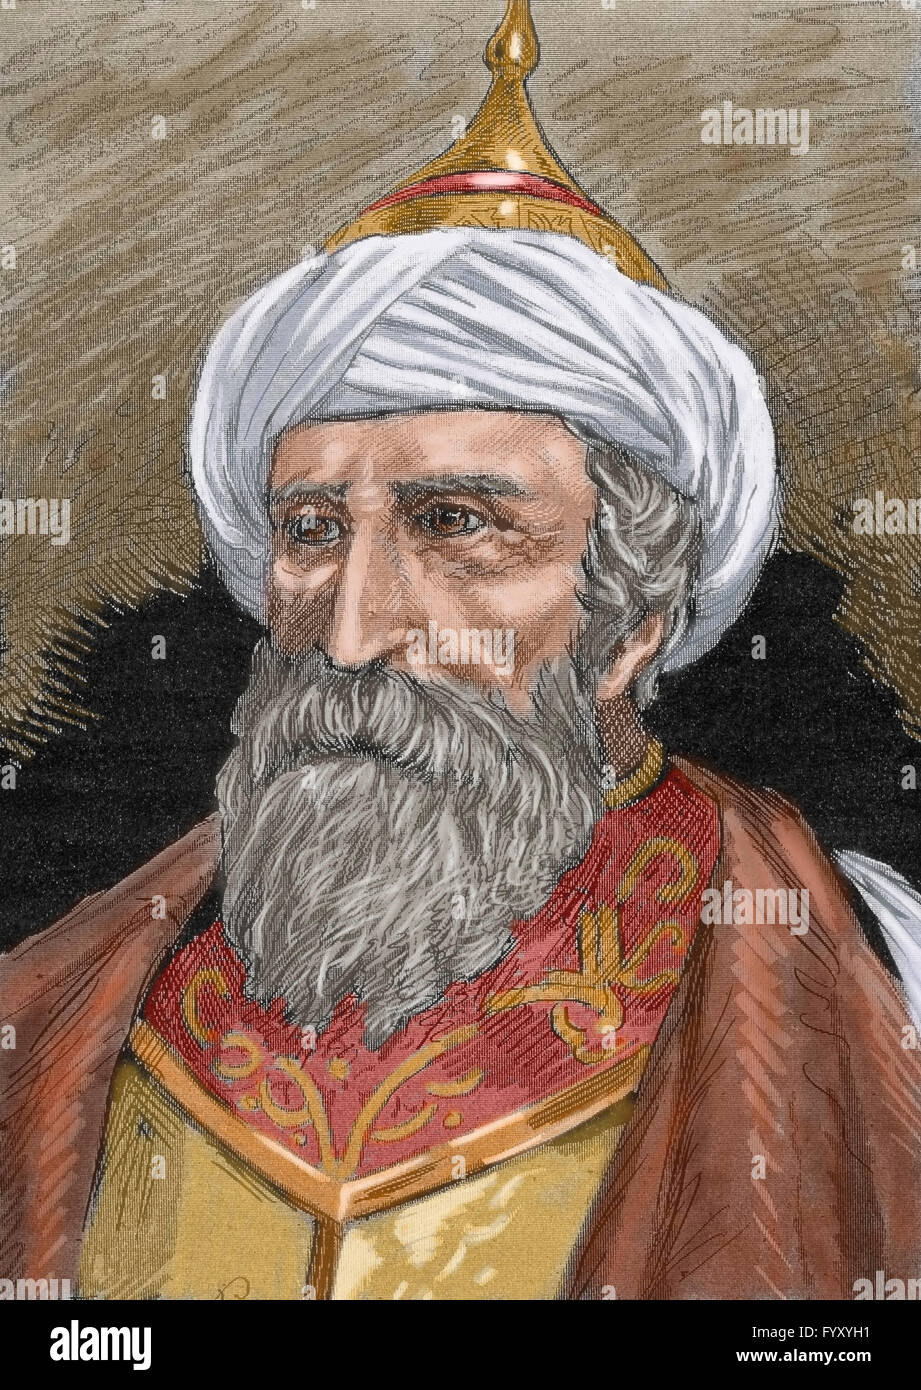 Muezzinzade Ali Pasha, also known as Sofu Ali Pasha, Sufi Ali Pasha or Meyzinoglu Ali Pasha (d.1571). Ottoman statesman and naval officer. He was Kapudan Pasha (Grand Admiral) in command of the Turkish fleet at the naval Battle of Lepanto, where he was killed in action. Portrait. Engraving. Colored. Stock Photo